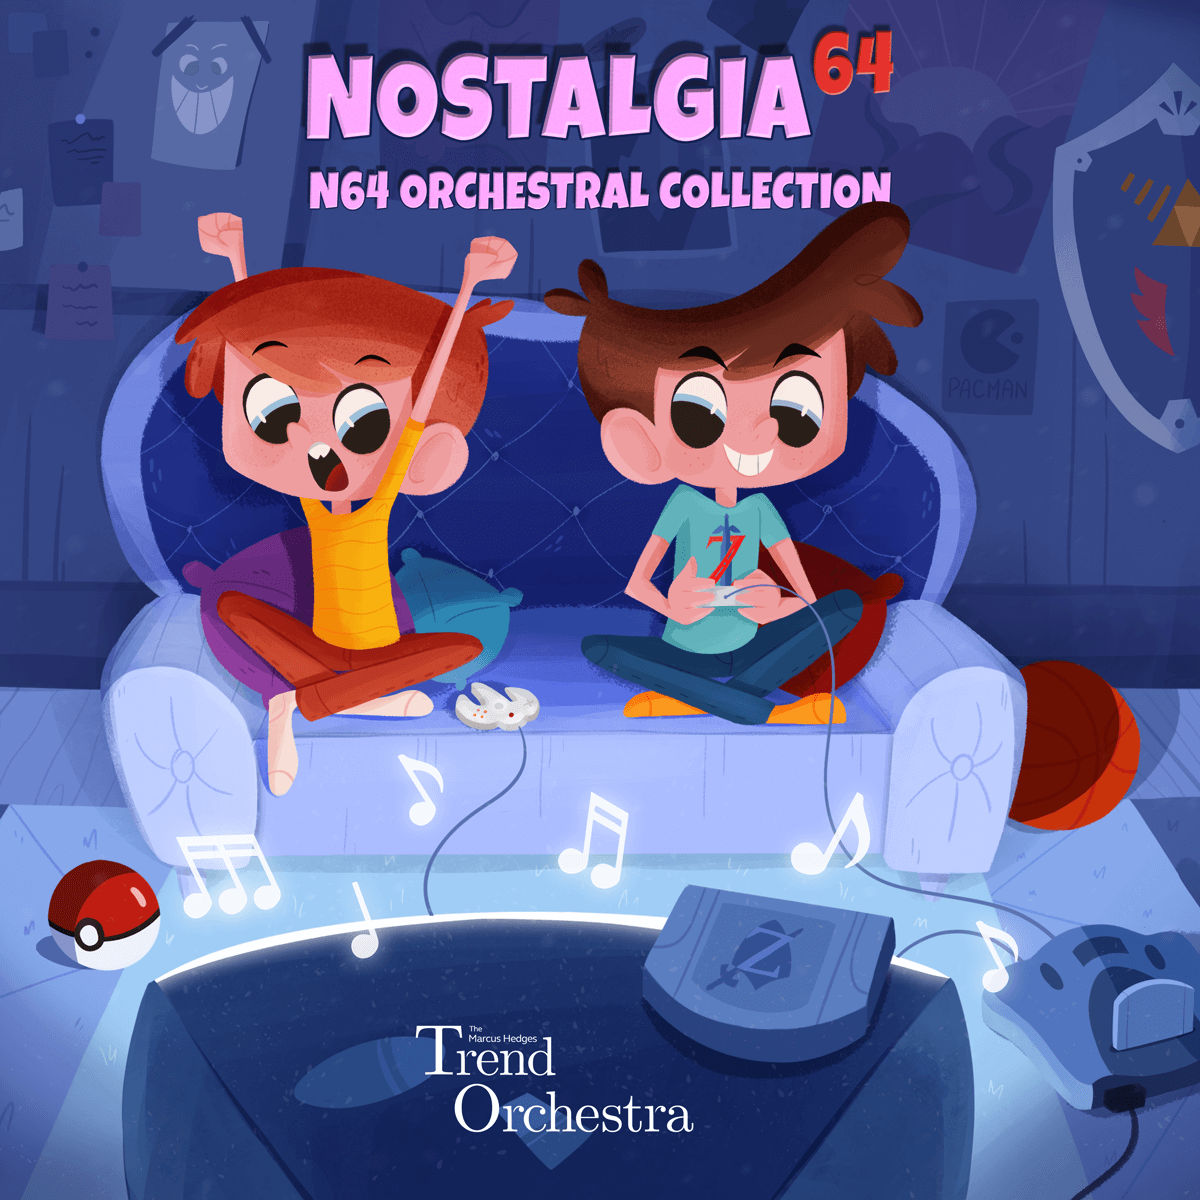 Nostalgia 64 (N64 orchestral collection)